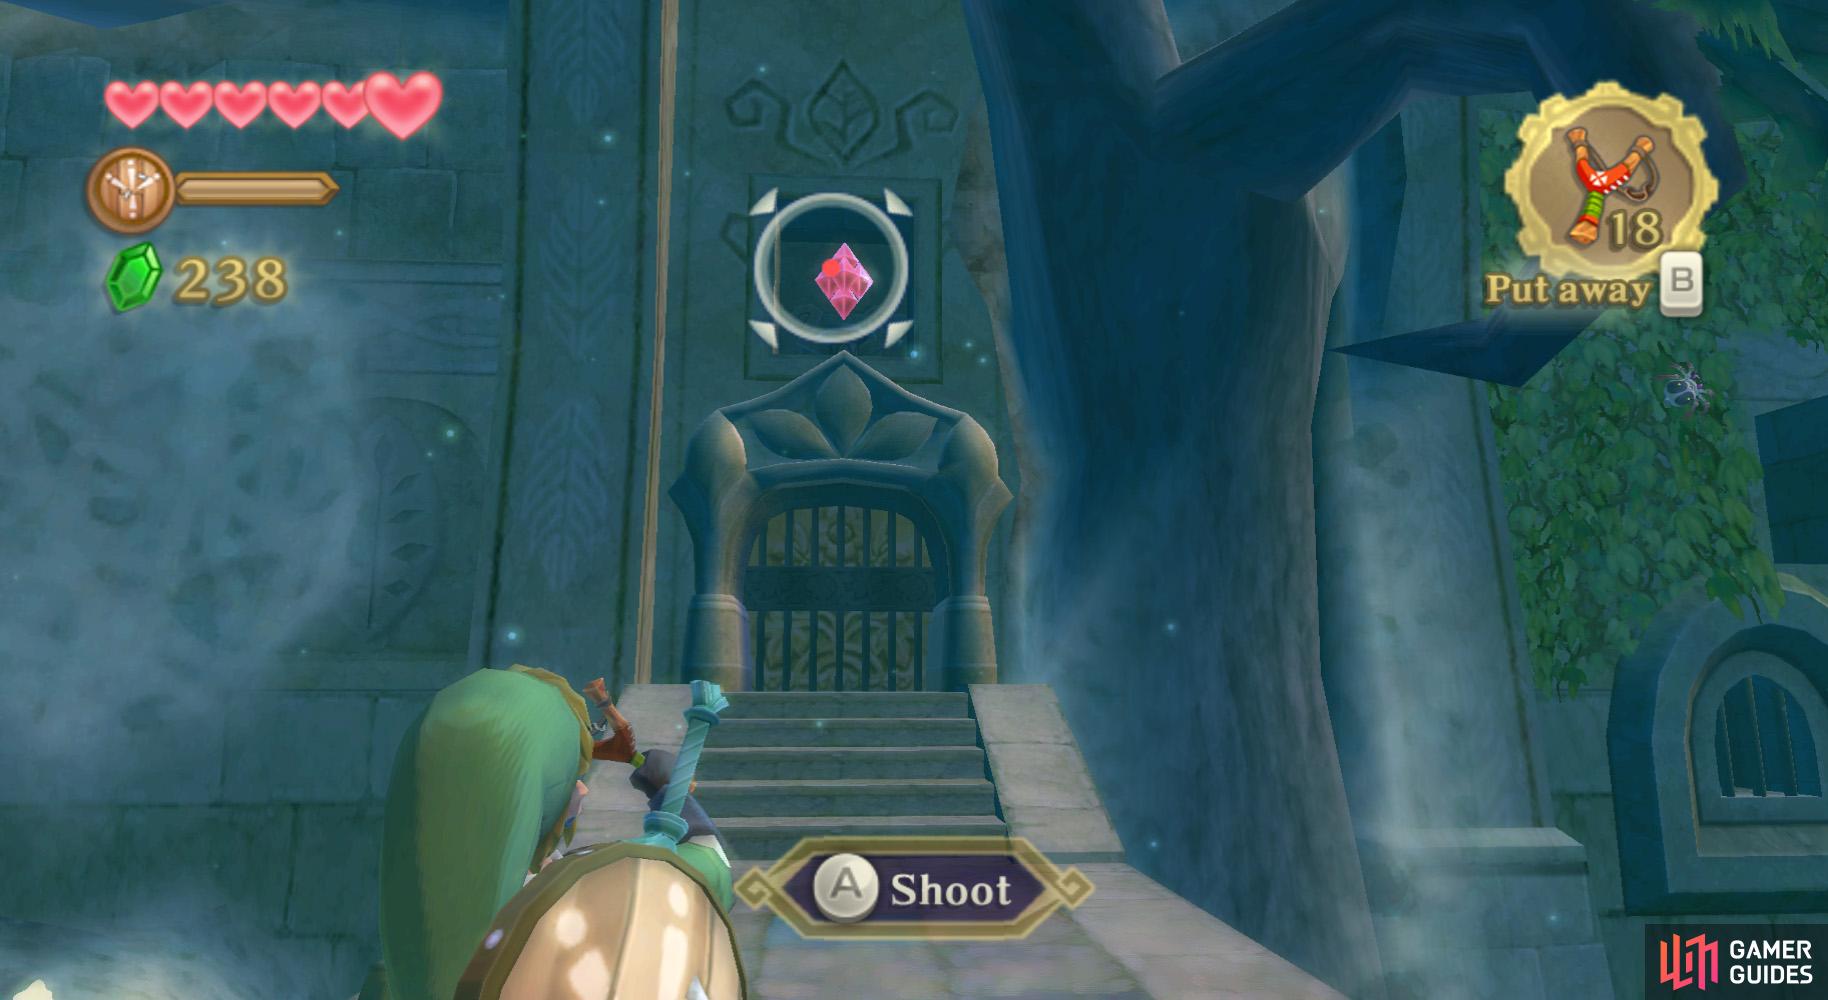 Then when the coast is clear, shoot the crystal switch above the door.